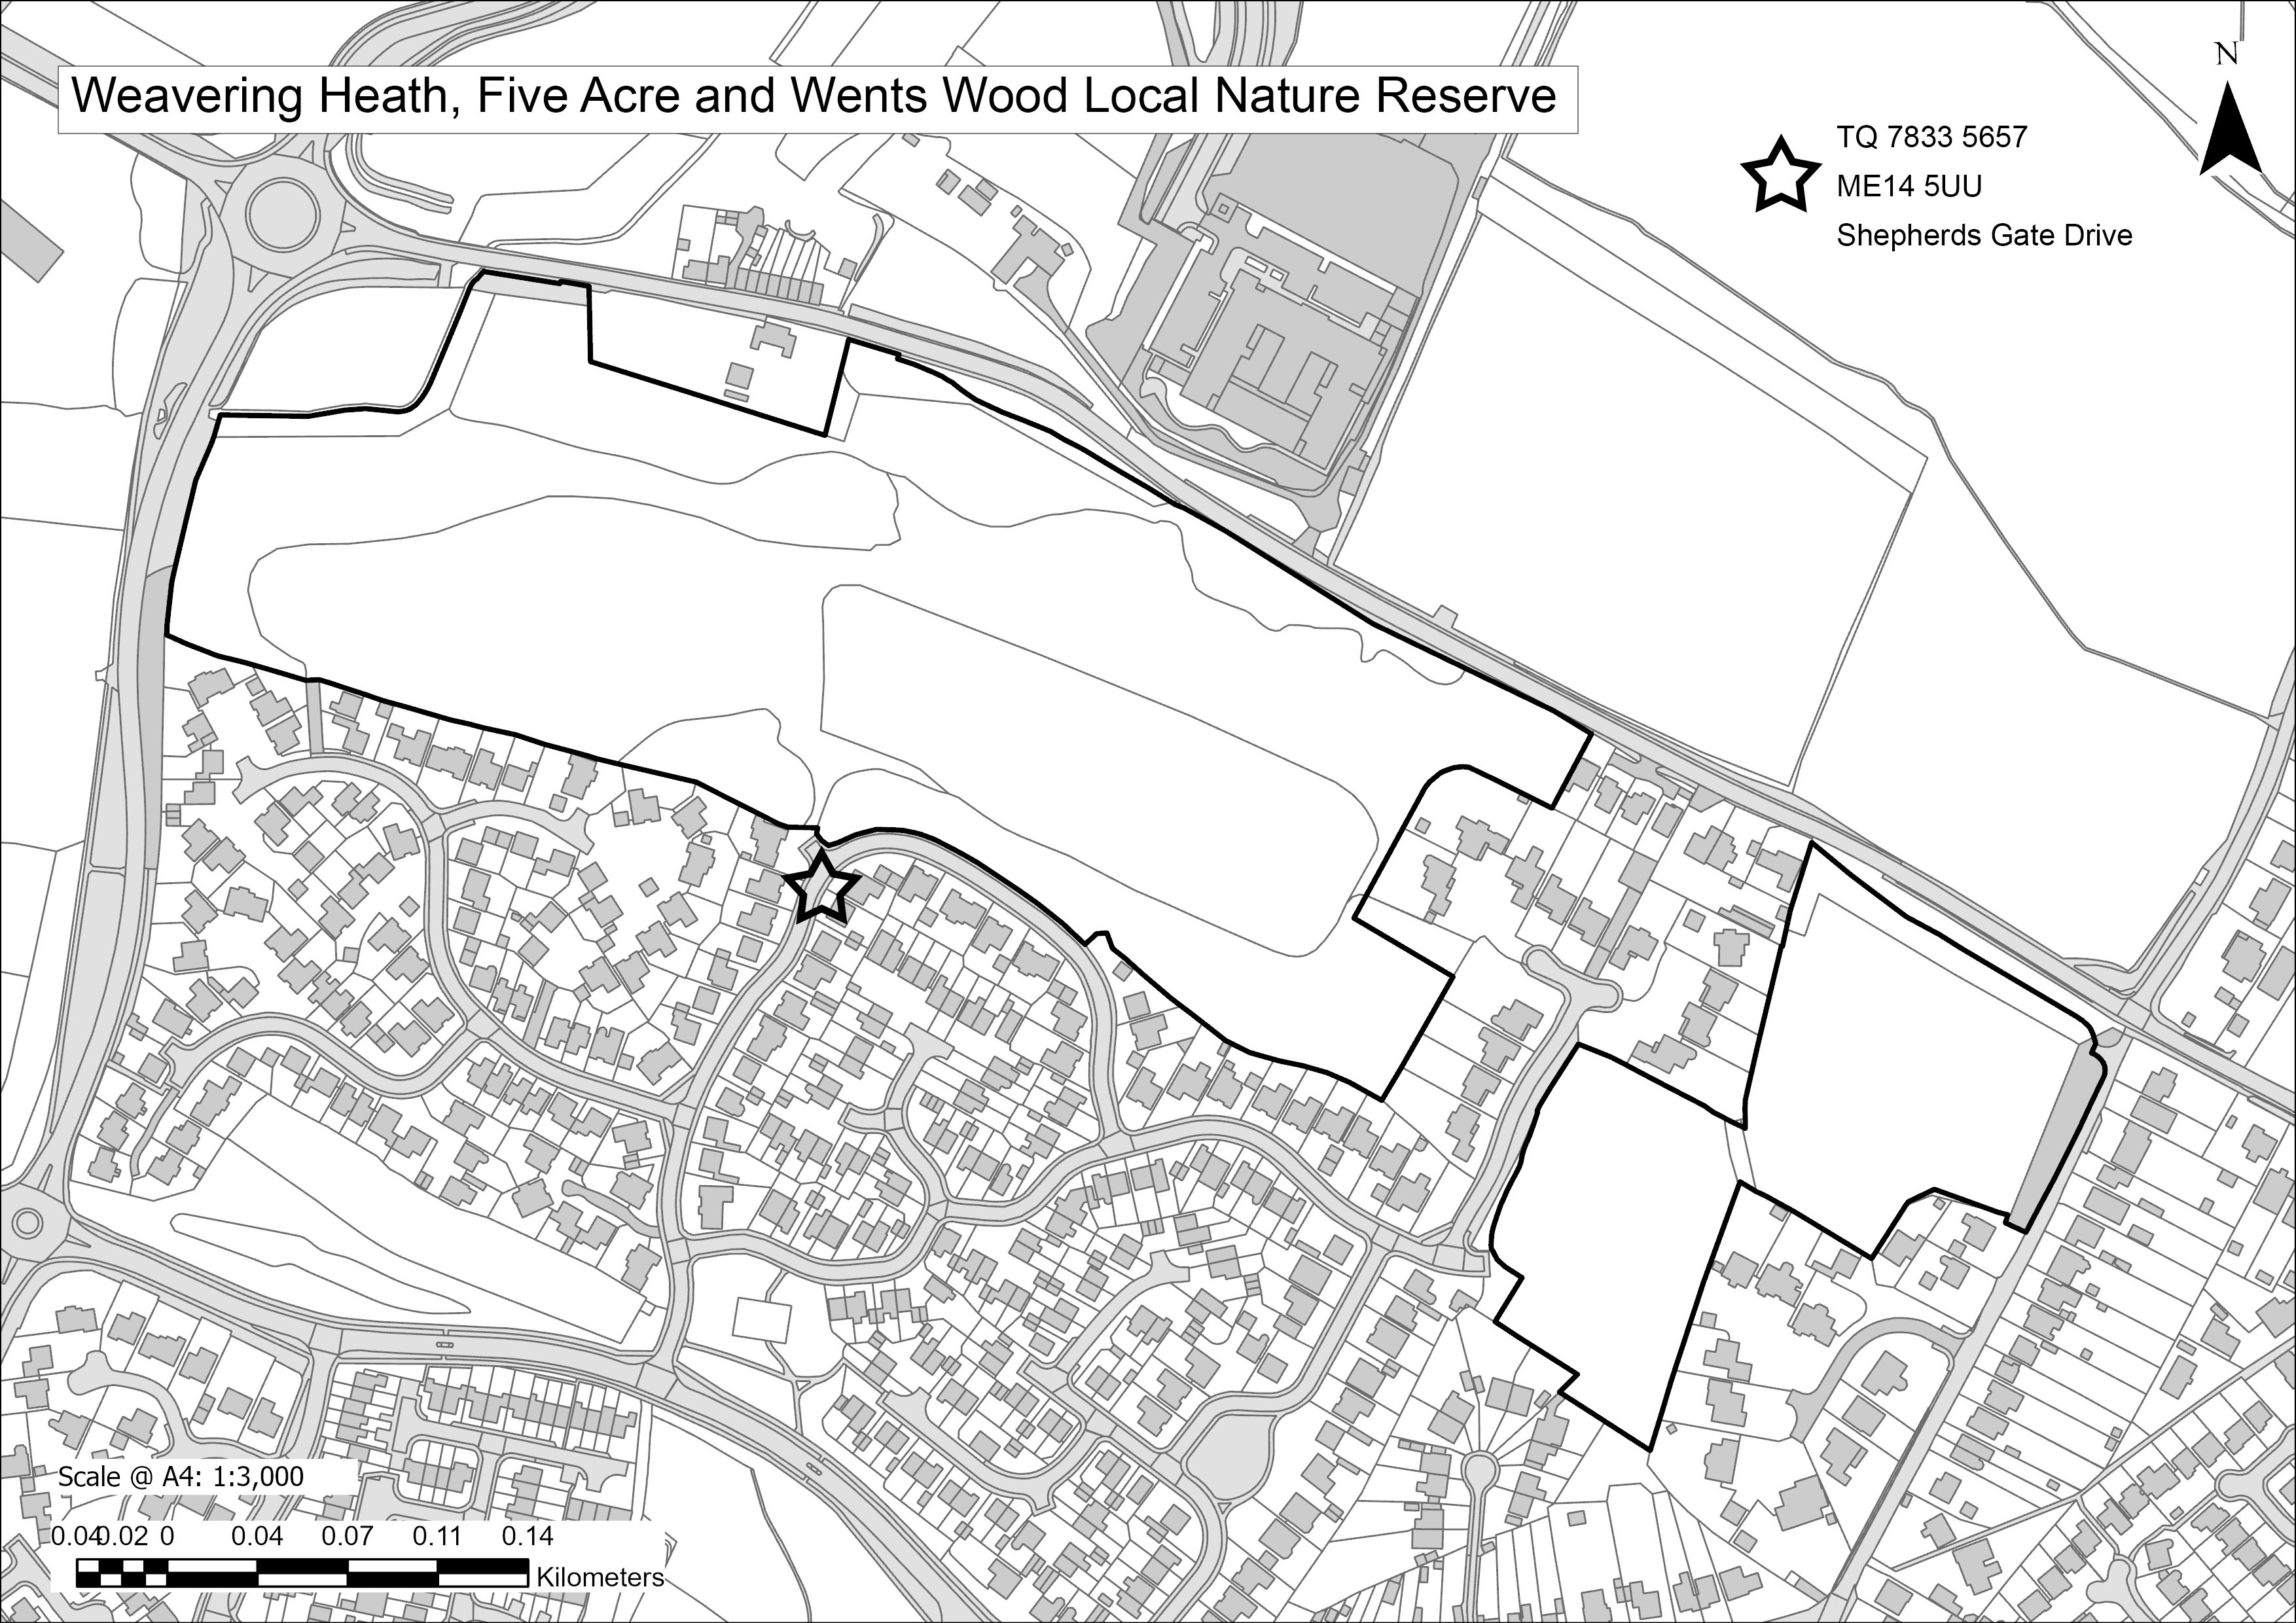 Map showing the proposed area Weavering Heath, Five Acre and Wents Wood local nature reserve, nearest roads Shepherds Gate Drive and Exton Gardens